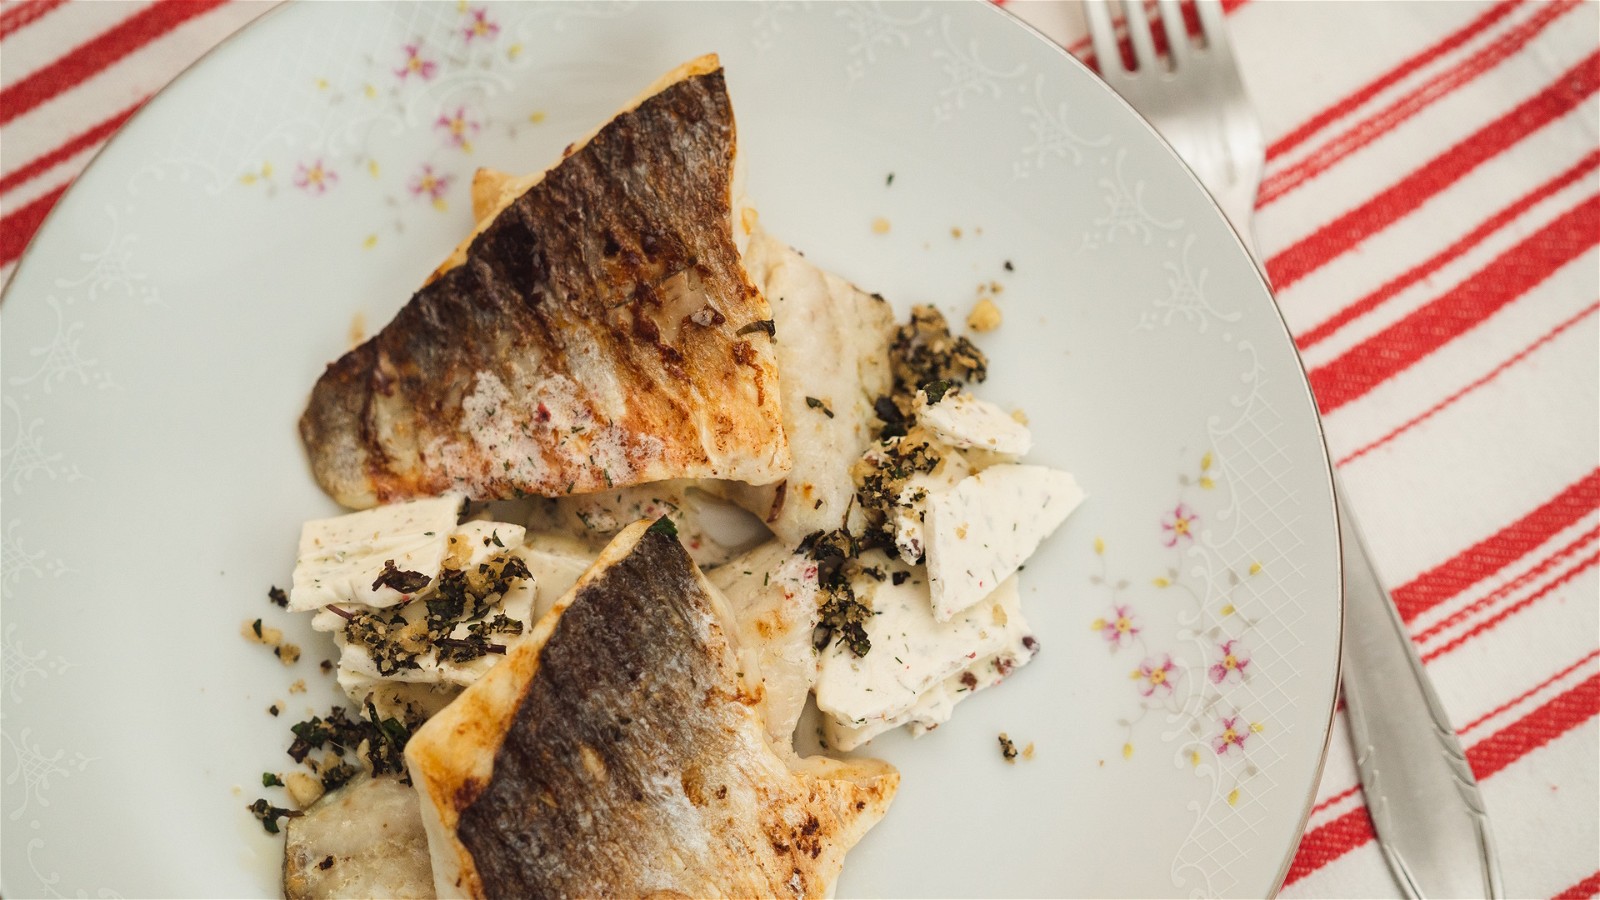 Image of Grilled Fish with Herb Butter